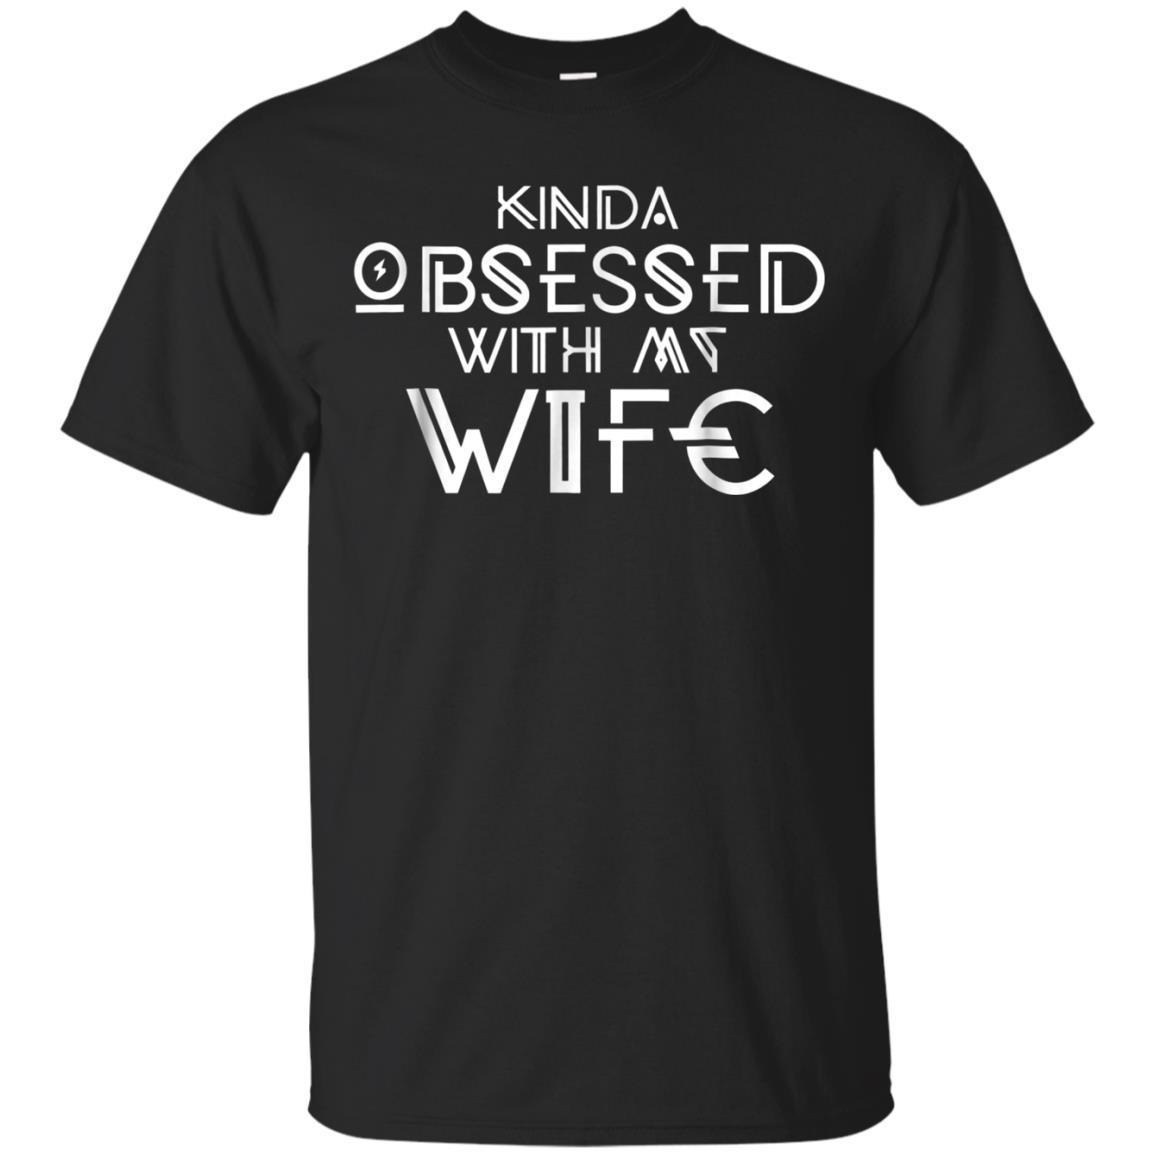 Kinda Obsessed With My Wife Funny Novelty Tshirt T-shirt - Amyna